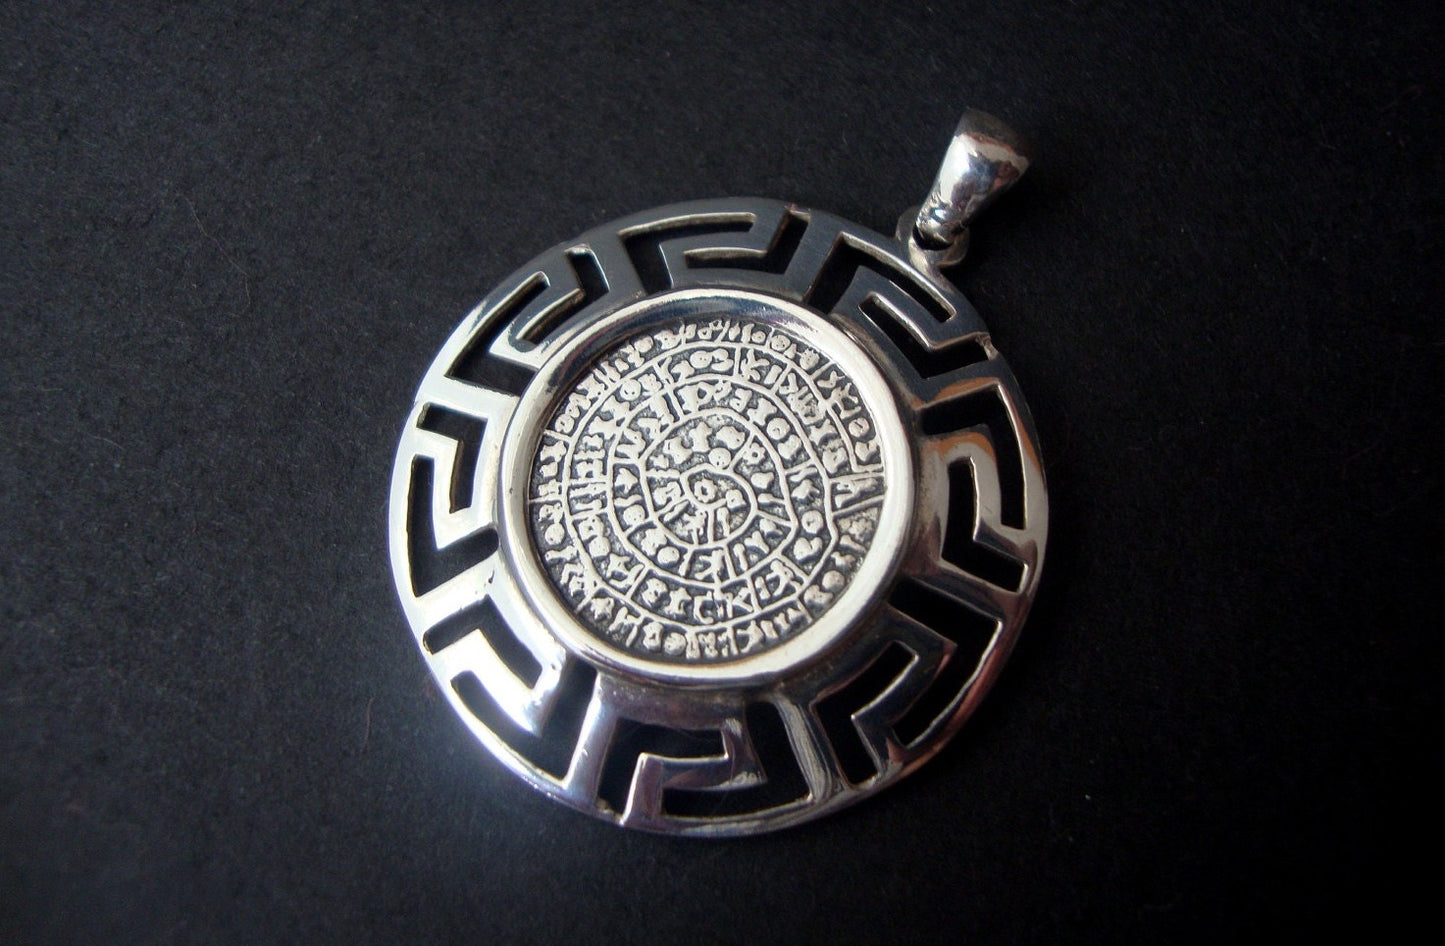 An intricately designed Sterling Silver 925 pendant featuring an Ancient Phaistos Disc & Greek Eternity Key Frame. The pendant has a diameter of 34 mm (1.32 inches) and a height of 40 mm (1.56 inches), including the hanger. Hallmarked 925. Handcrafted in Greece, showcasing rich cultural heritage and artisanal craftsmanship.